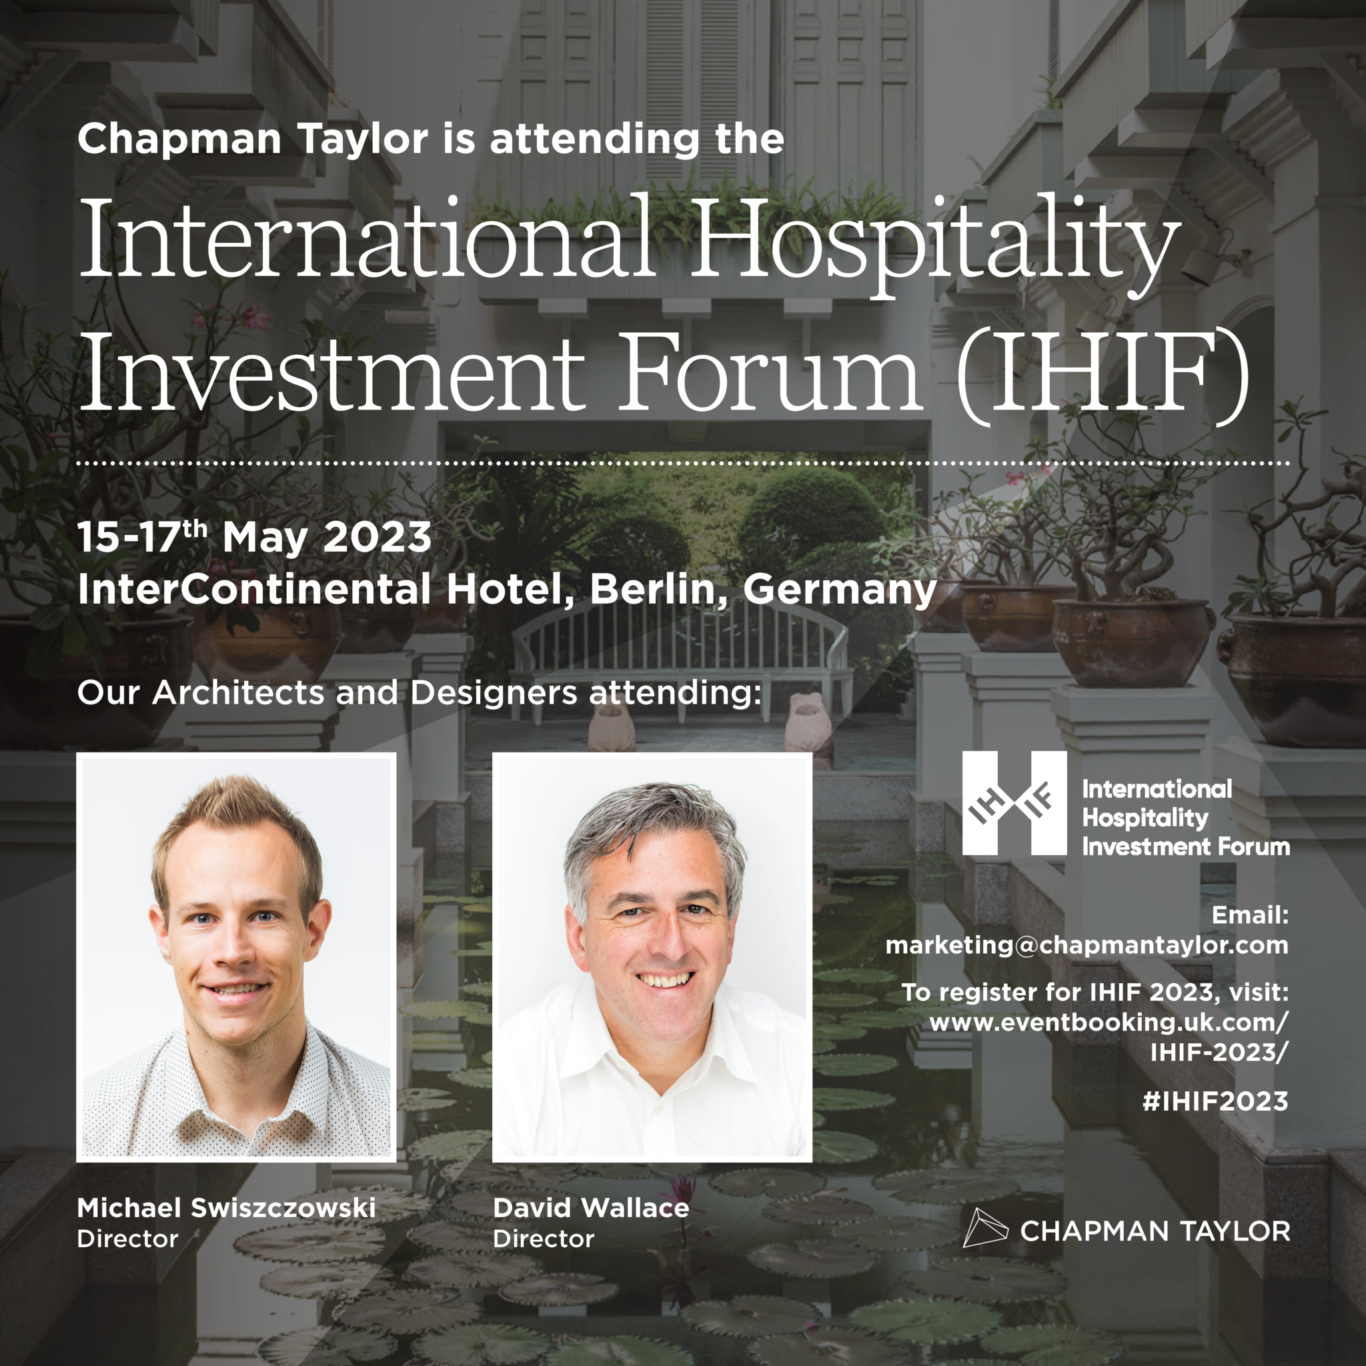 Chapman Taylor UK Directors Michael Swiszczowski and David Wallace will be attending the International Hospitality Investment Forum IHIF in Berlin from the 15 17th May 2023.png